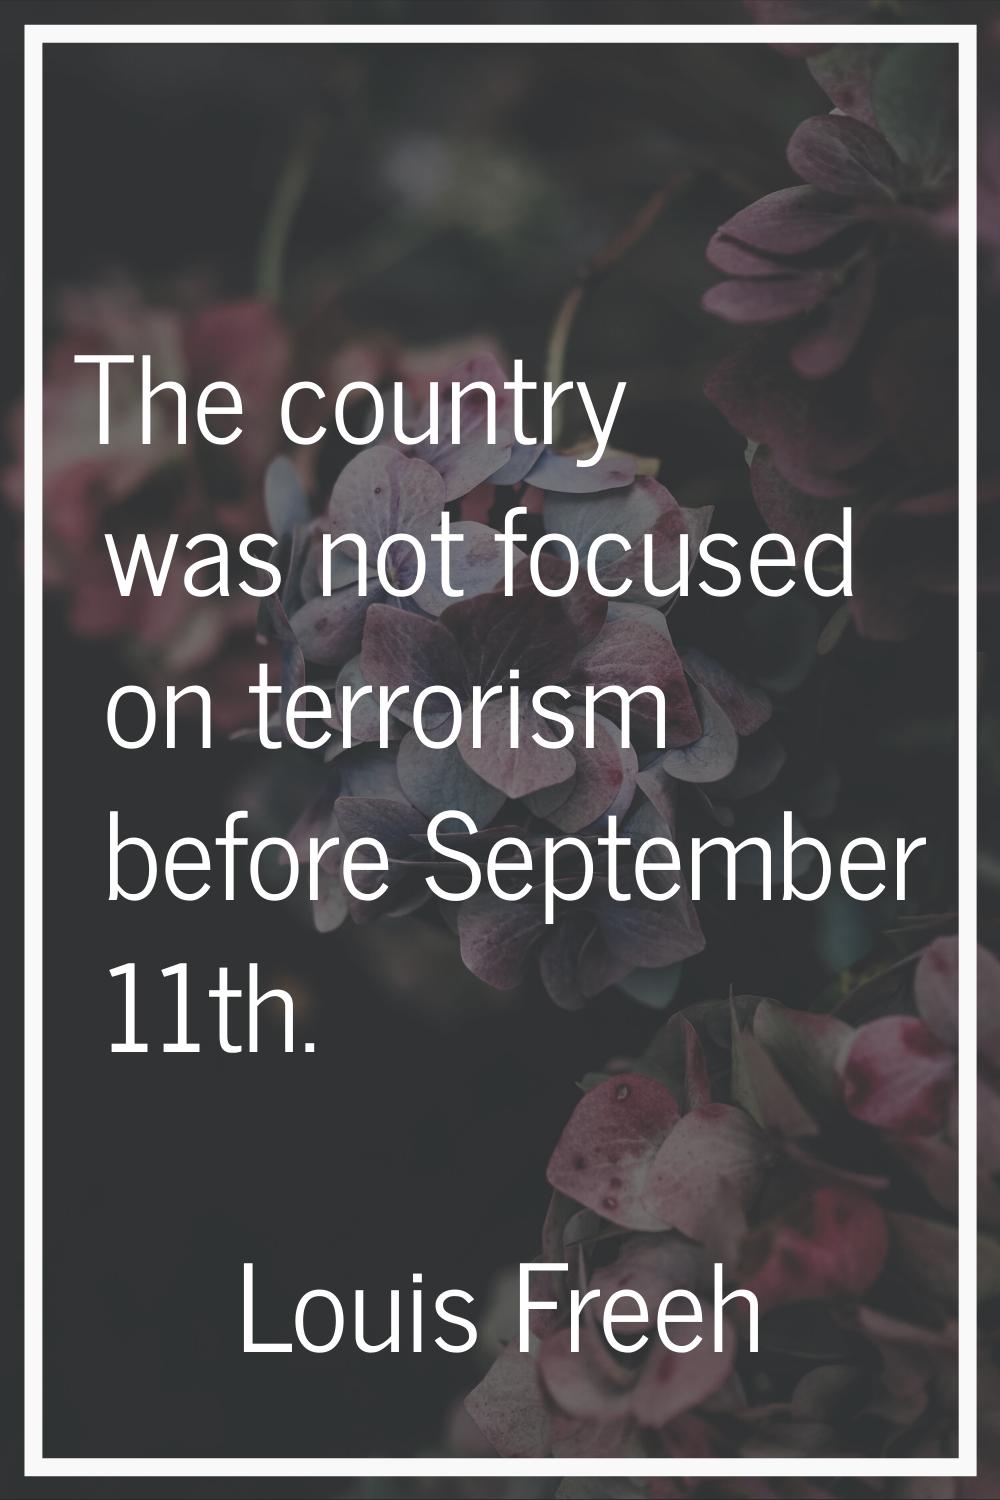 The country was not focused on terrorism before September 11th.